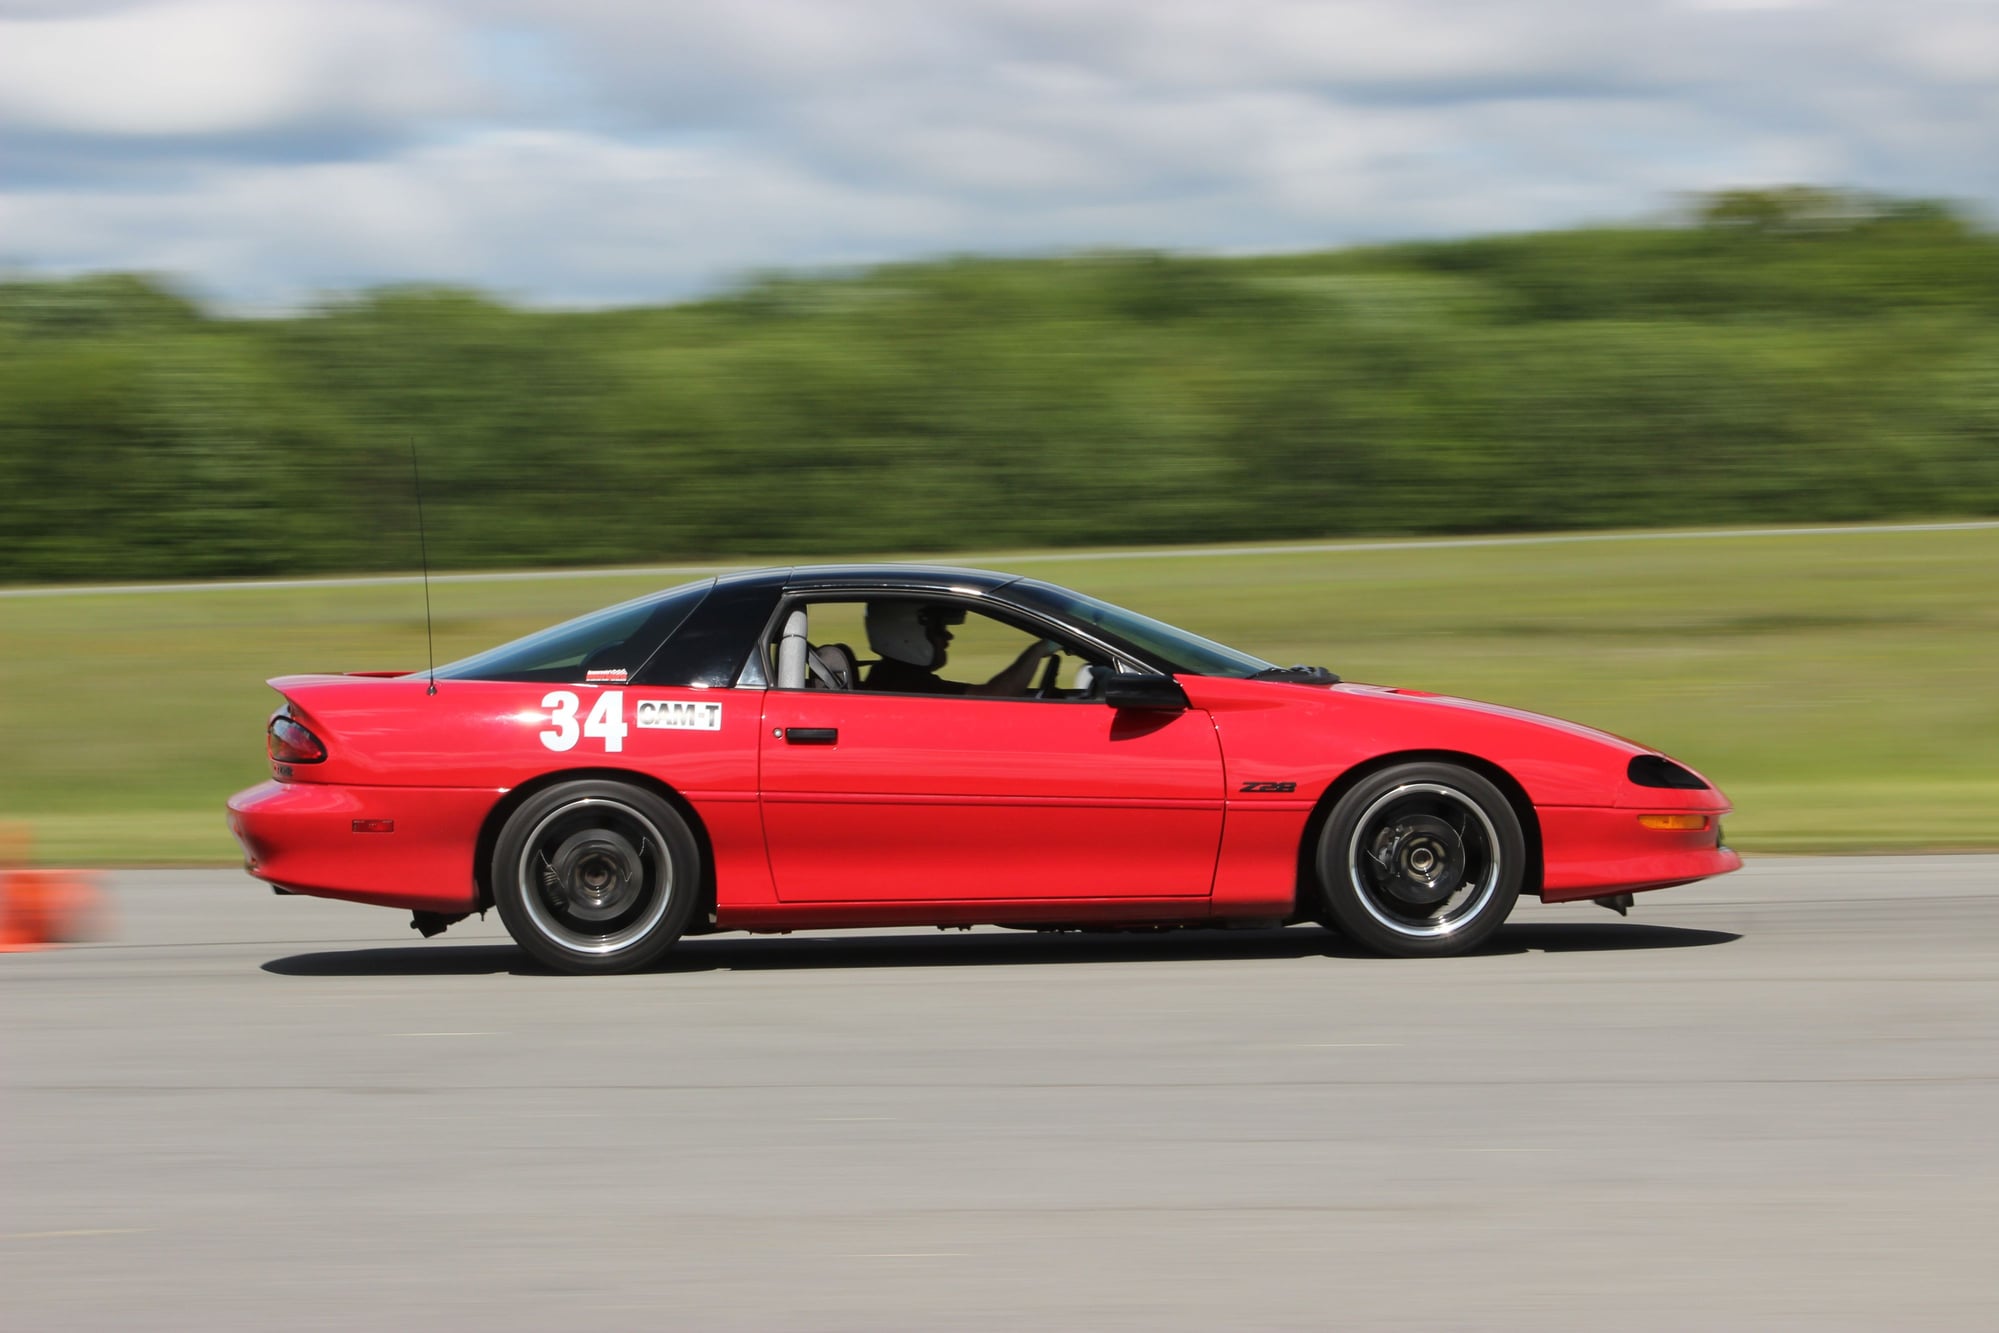 1994 Chevrolet Camaro - 1994 Z28 1LE - Track Day/Autocross Car - Used - VIN 2G1FP22P6R2189625 - 52,691 Miles - 8 cyl - 2WD - Manual - Coupe - Red - Hollidaysburg, PA 16648, United States